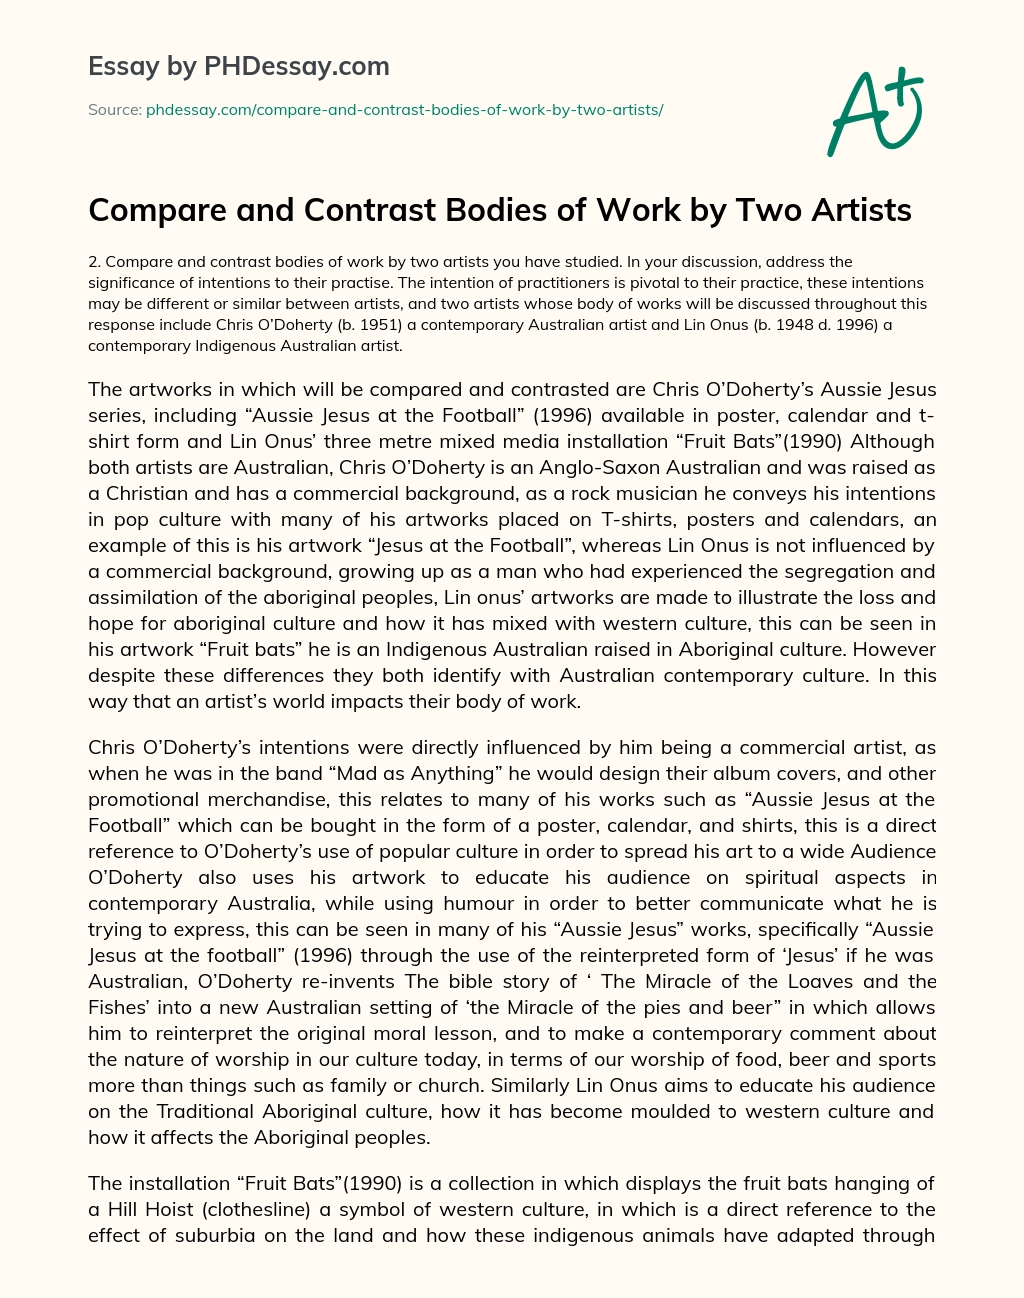 Compare and Contrast Bodies of Work by Two Artists essay